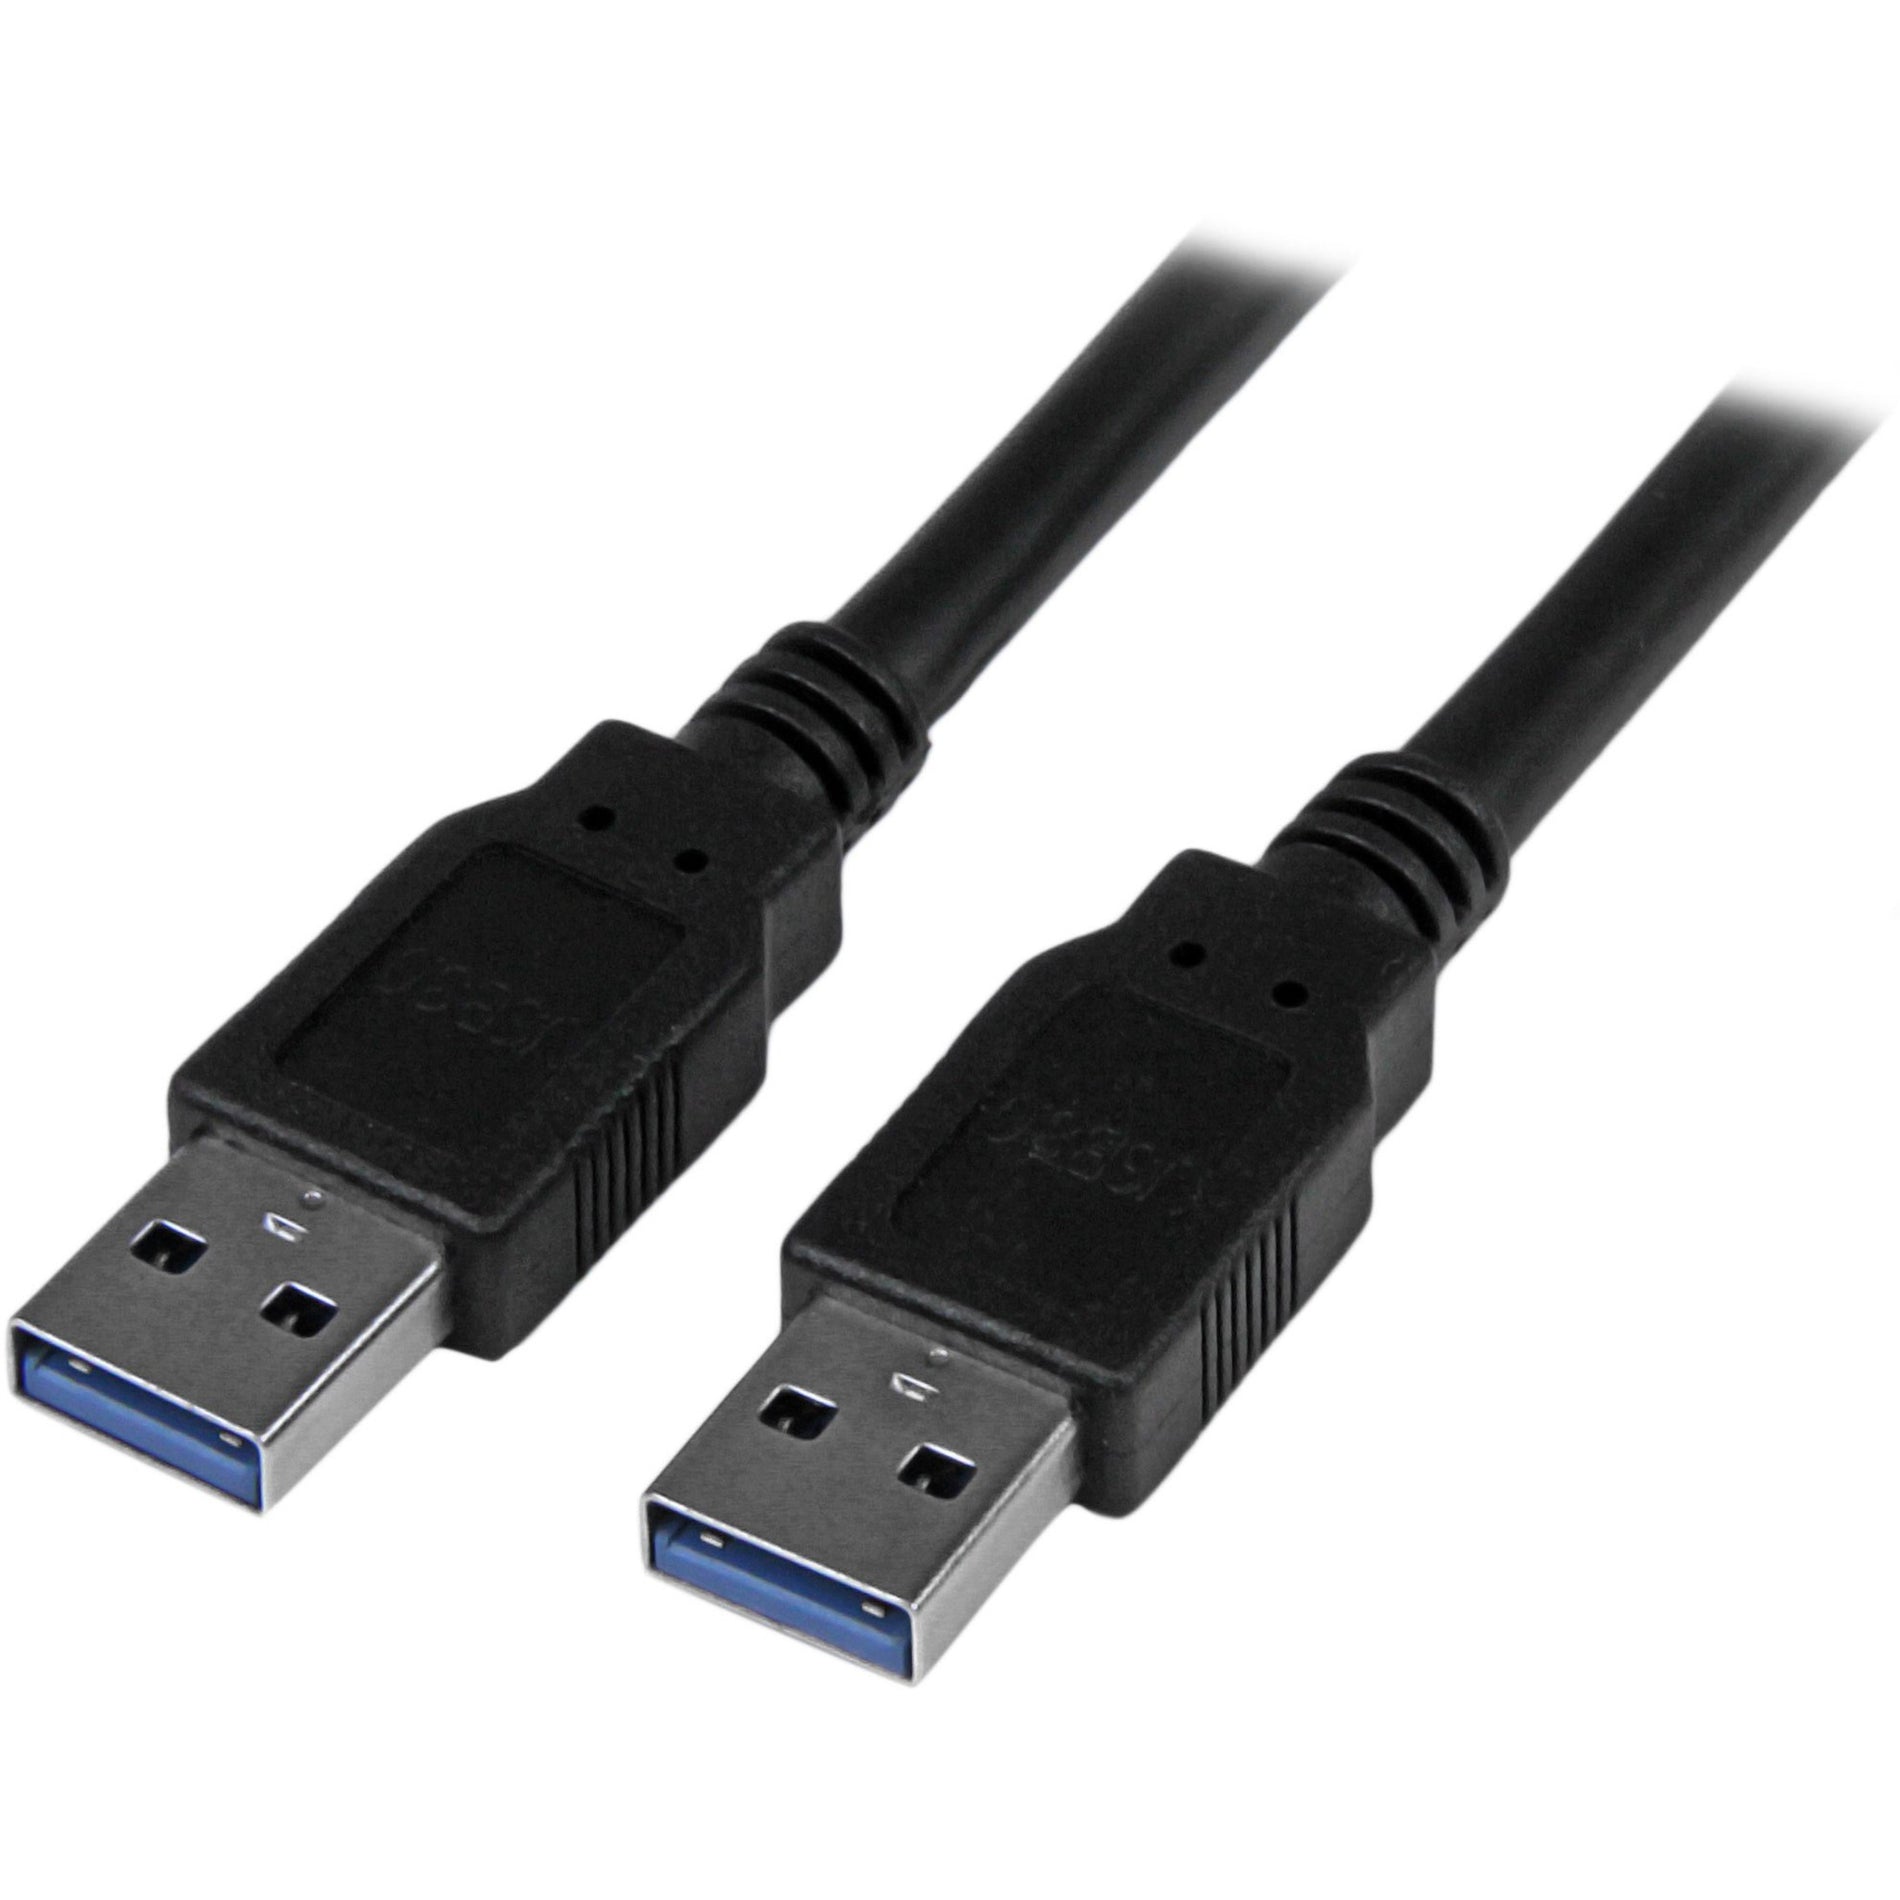 StarTech.com USB3SAA3MBK USB Data Transfer Cable, 10 ft - Long USB 3.0 Cable, 5 Gbps Data Transfer Rate